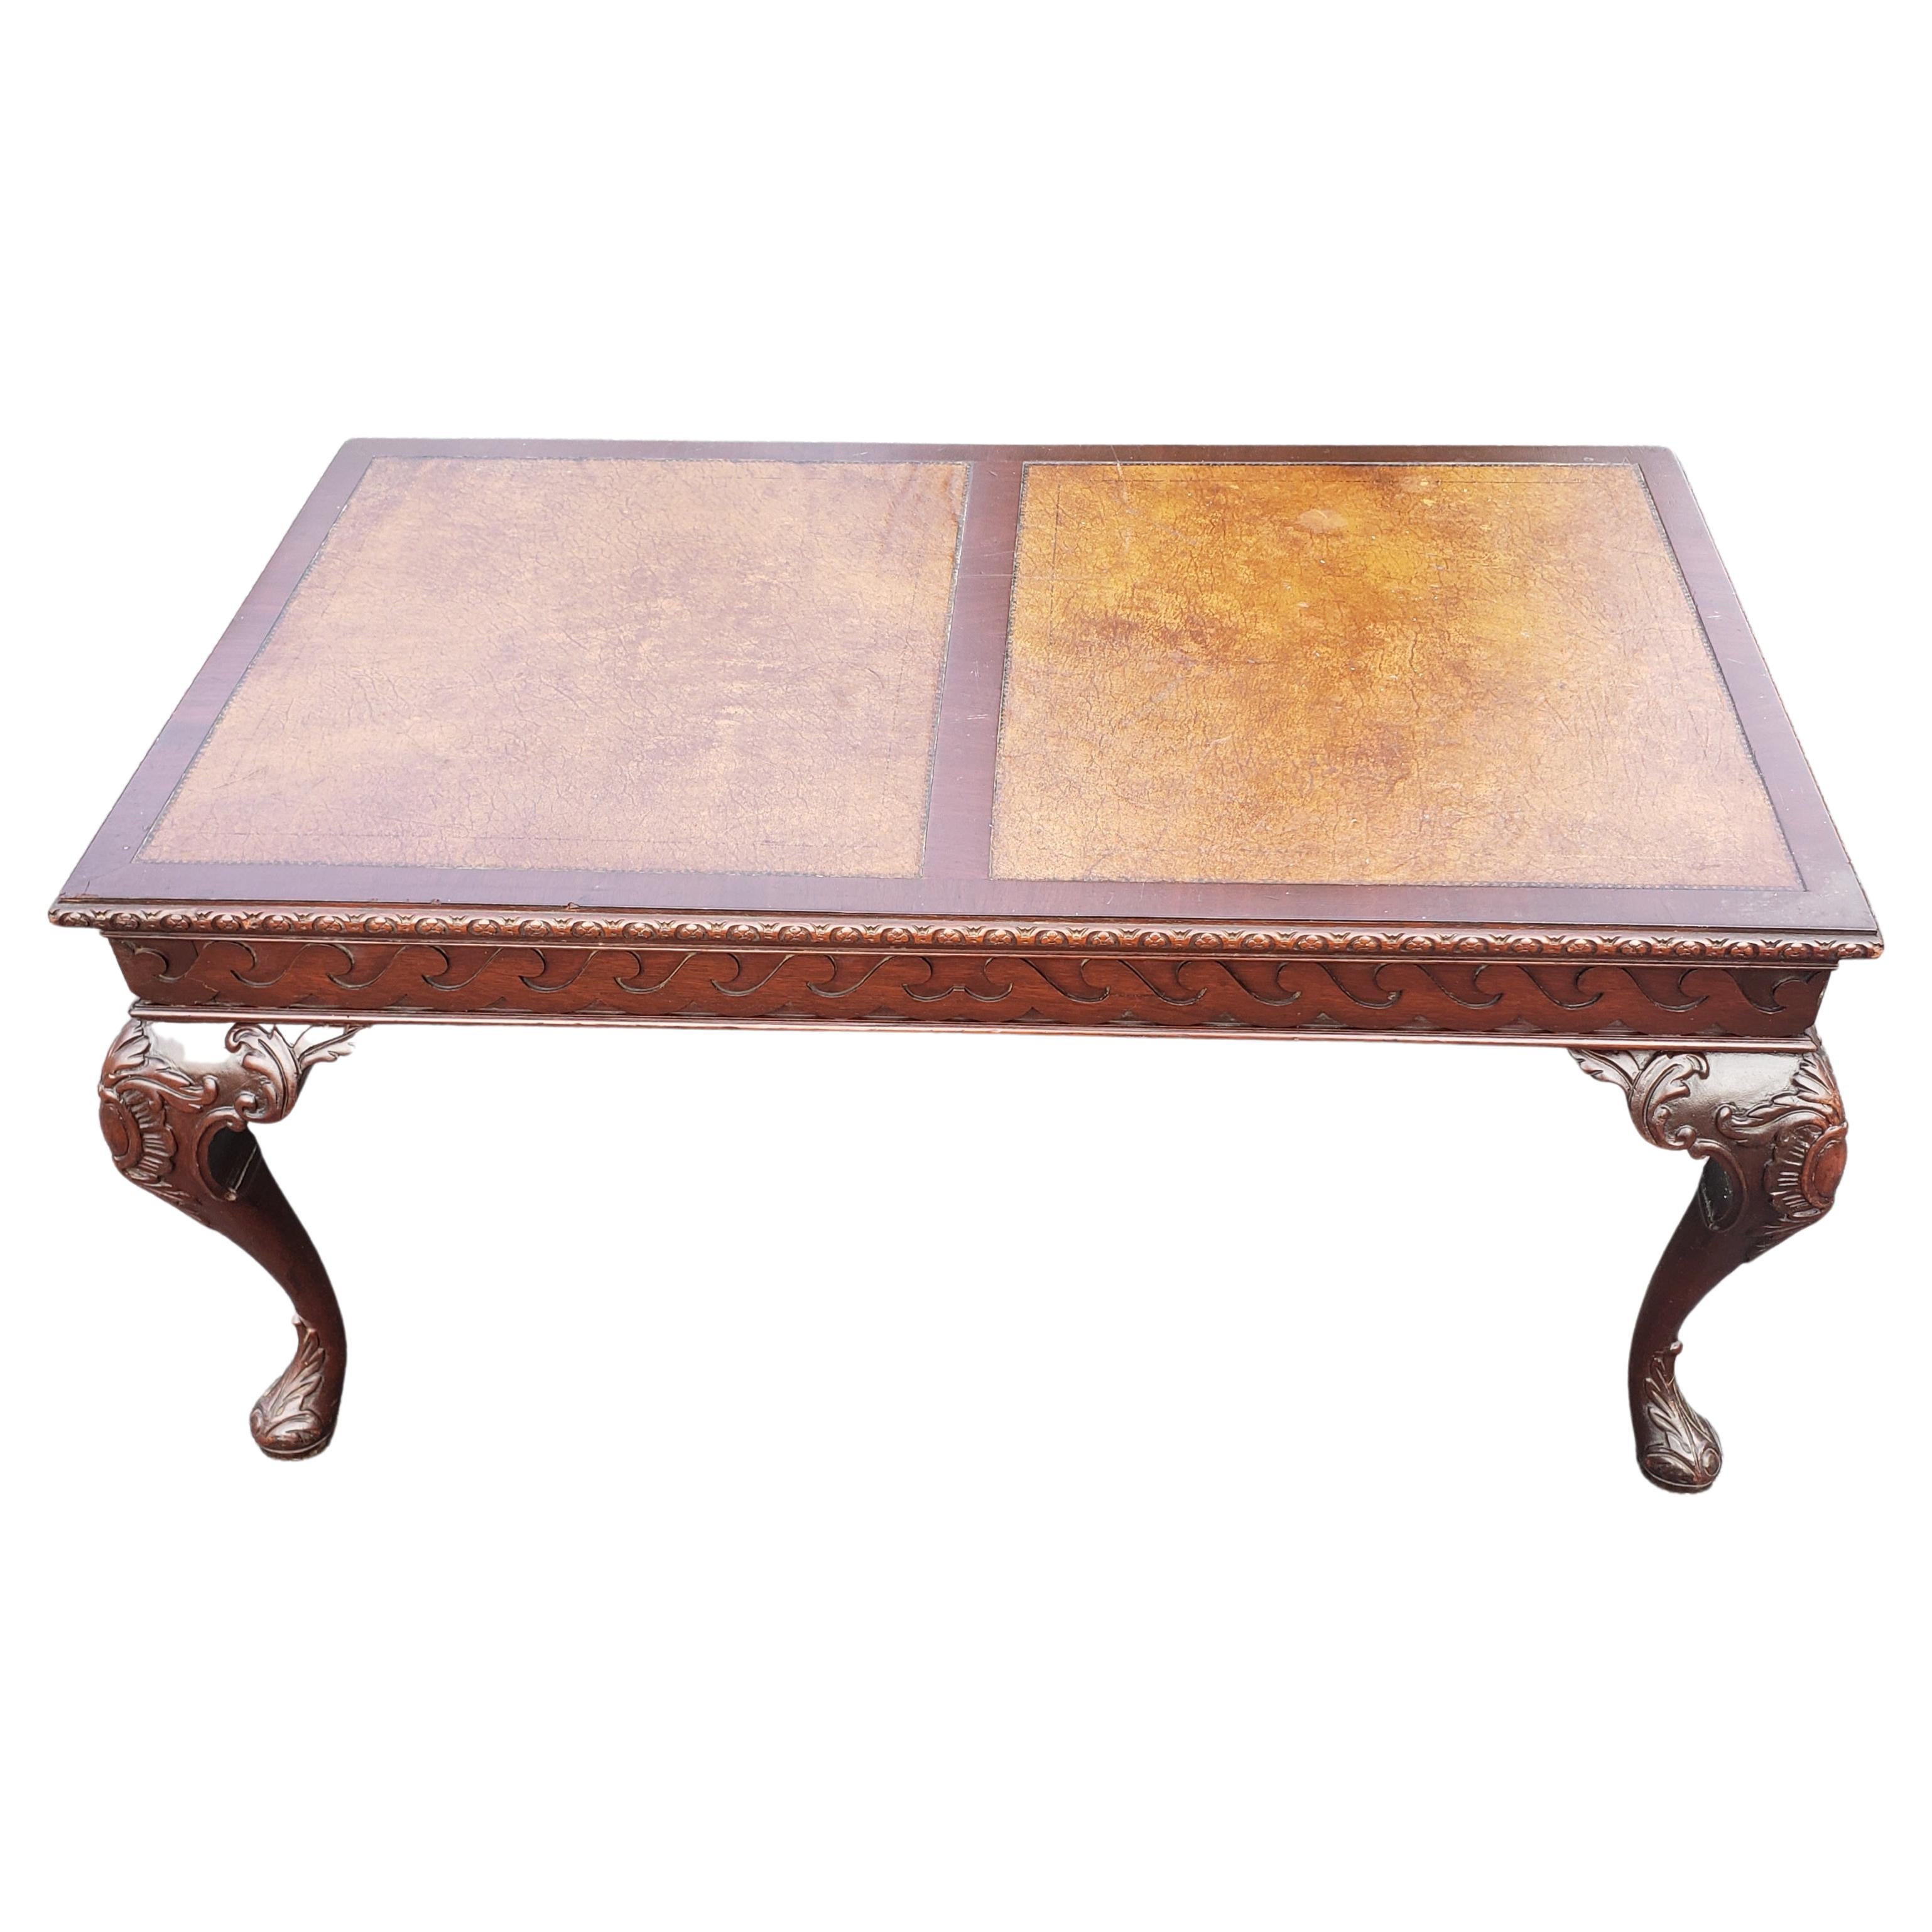 This antique Chippendale table is designed to add a sense of elegance and refinement to your living room or den. This Chippendale table is handcrafted to the old-world construction techniques. It is build with fine mahogany available, which was